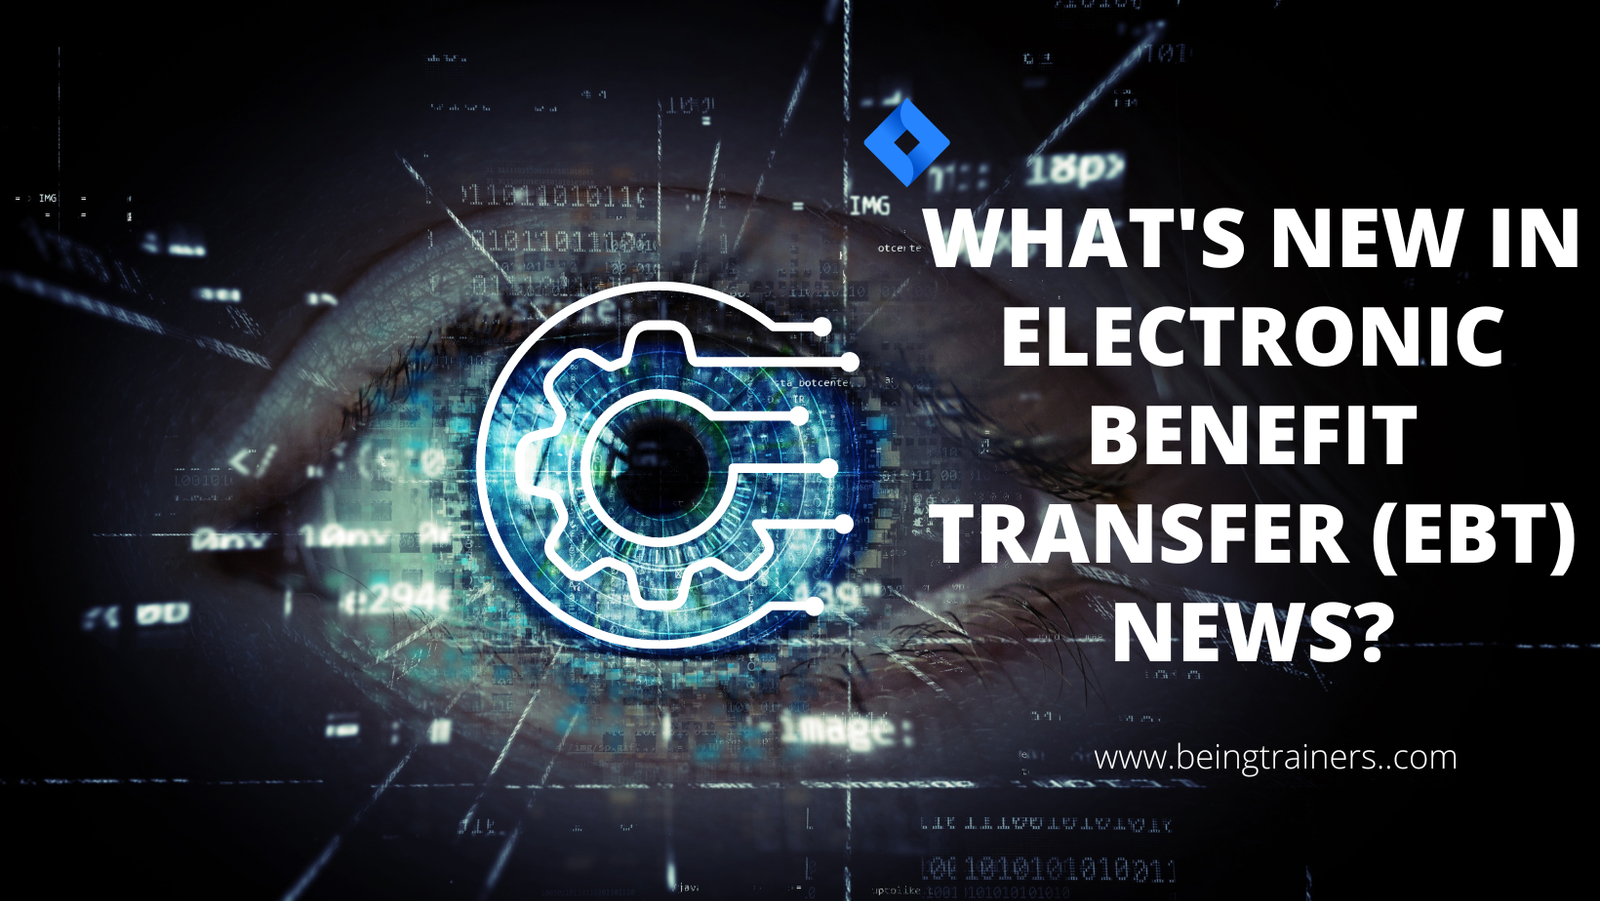 What's New in Electronic Benefit Transfer (EBT) News?